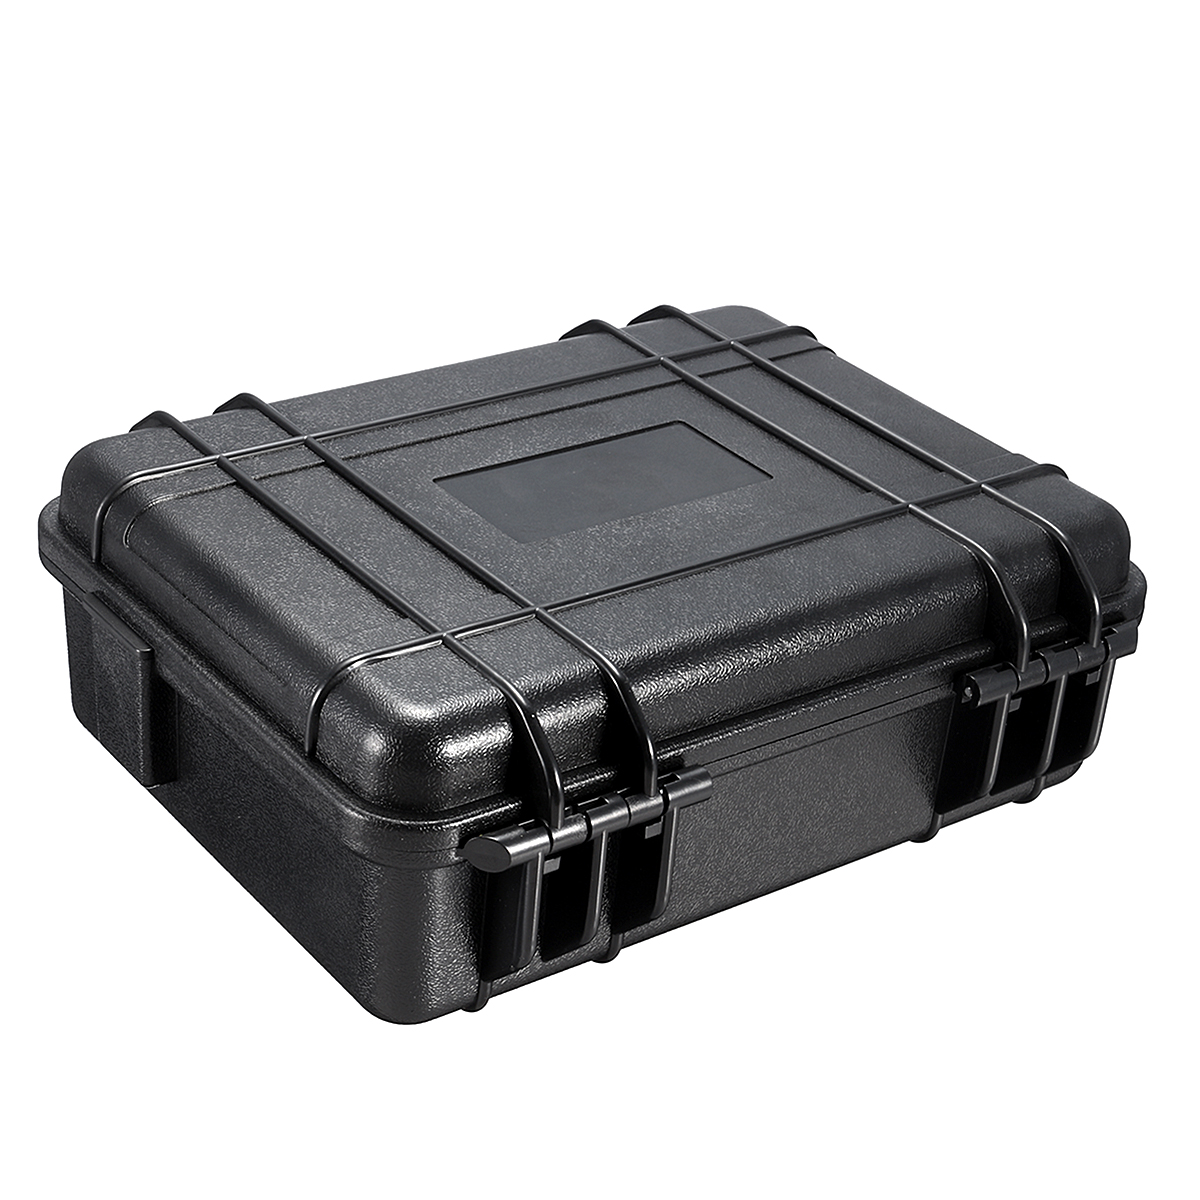 Waterproof-Hard-Carry-Tool-Case-Bag-Storage-Box-Camera-Photography-with-Sponge-1636226-4